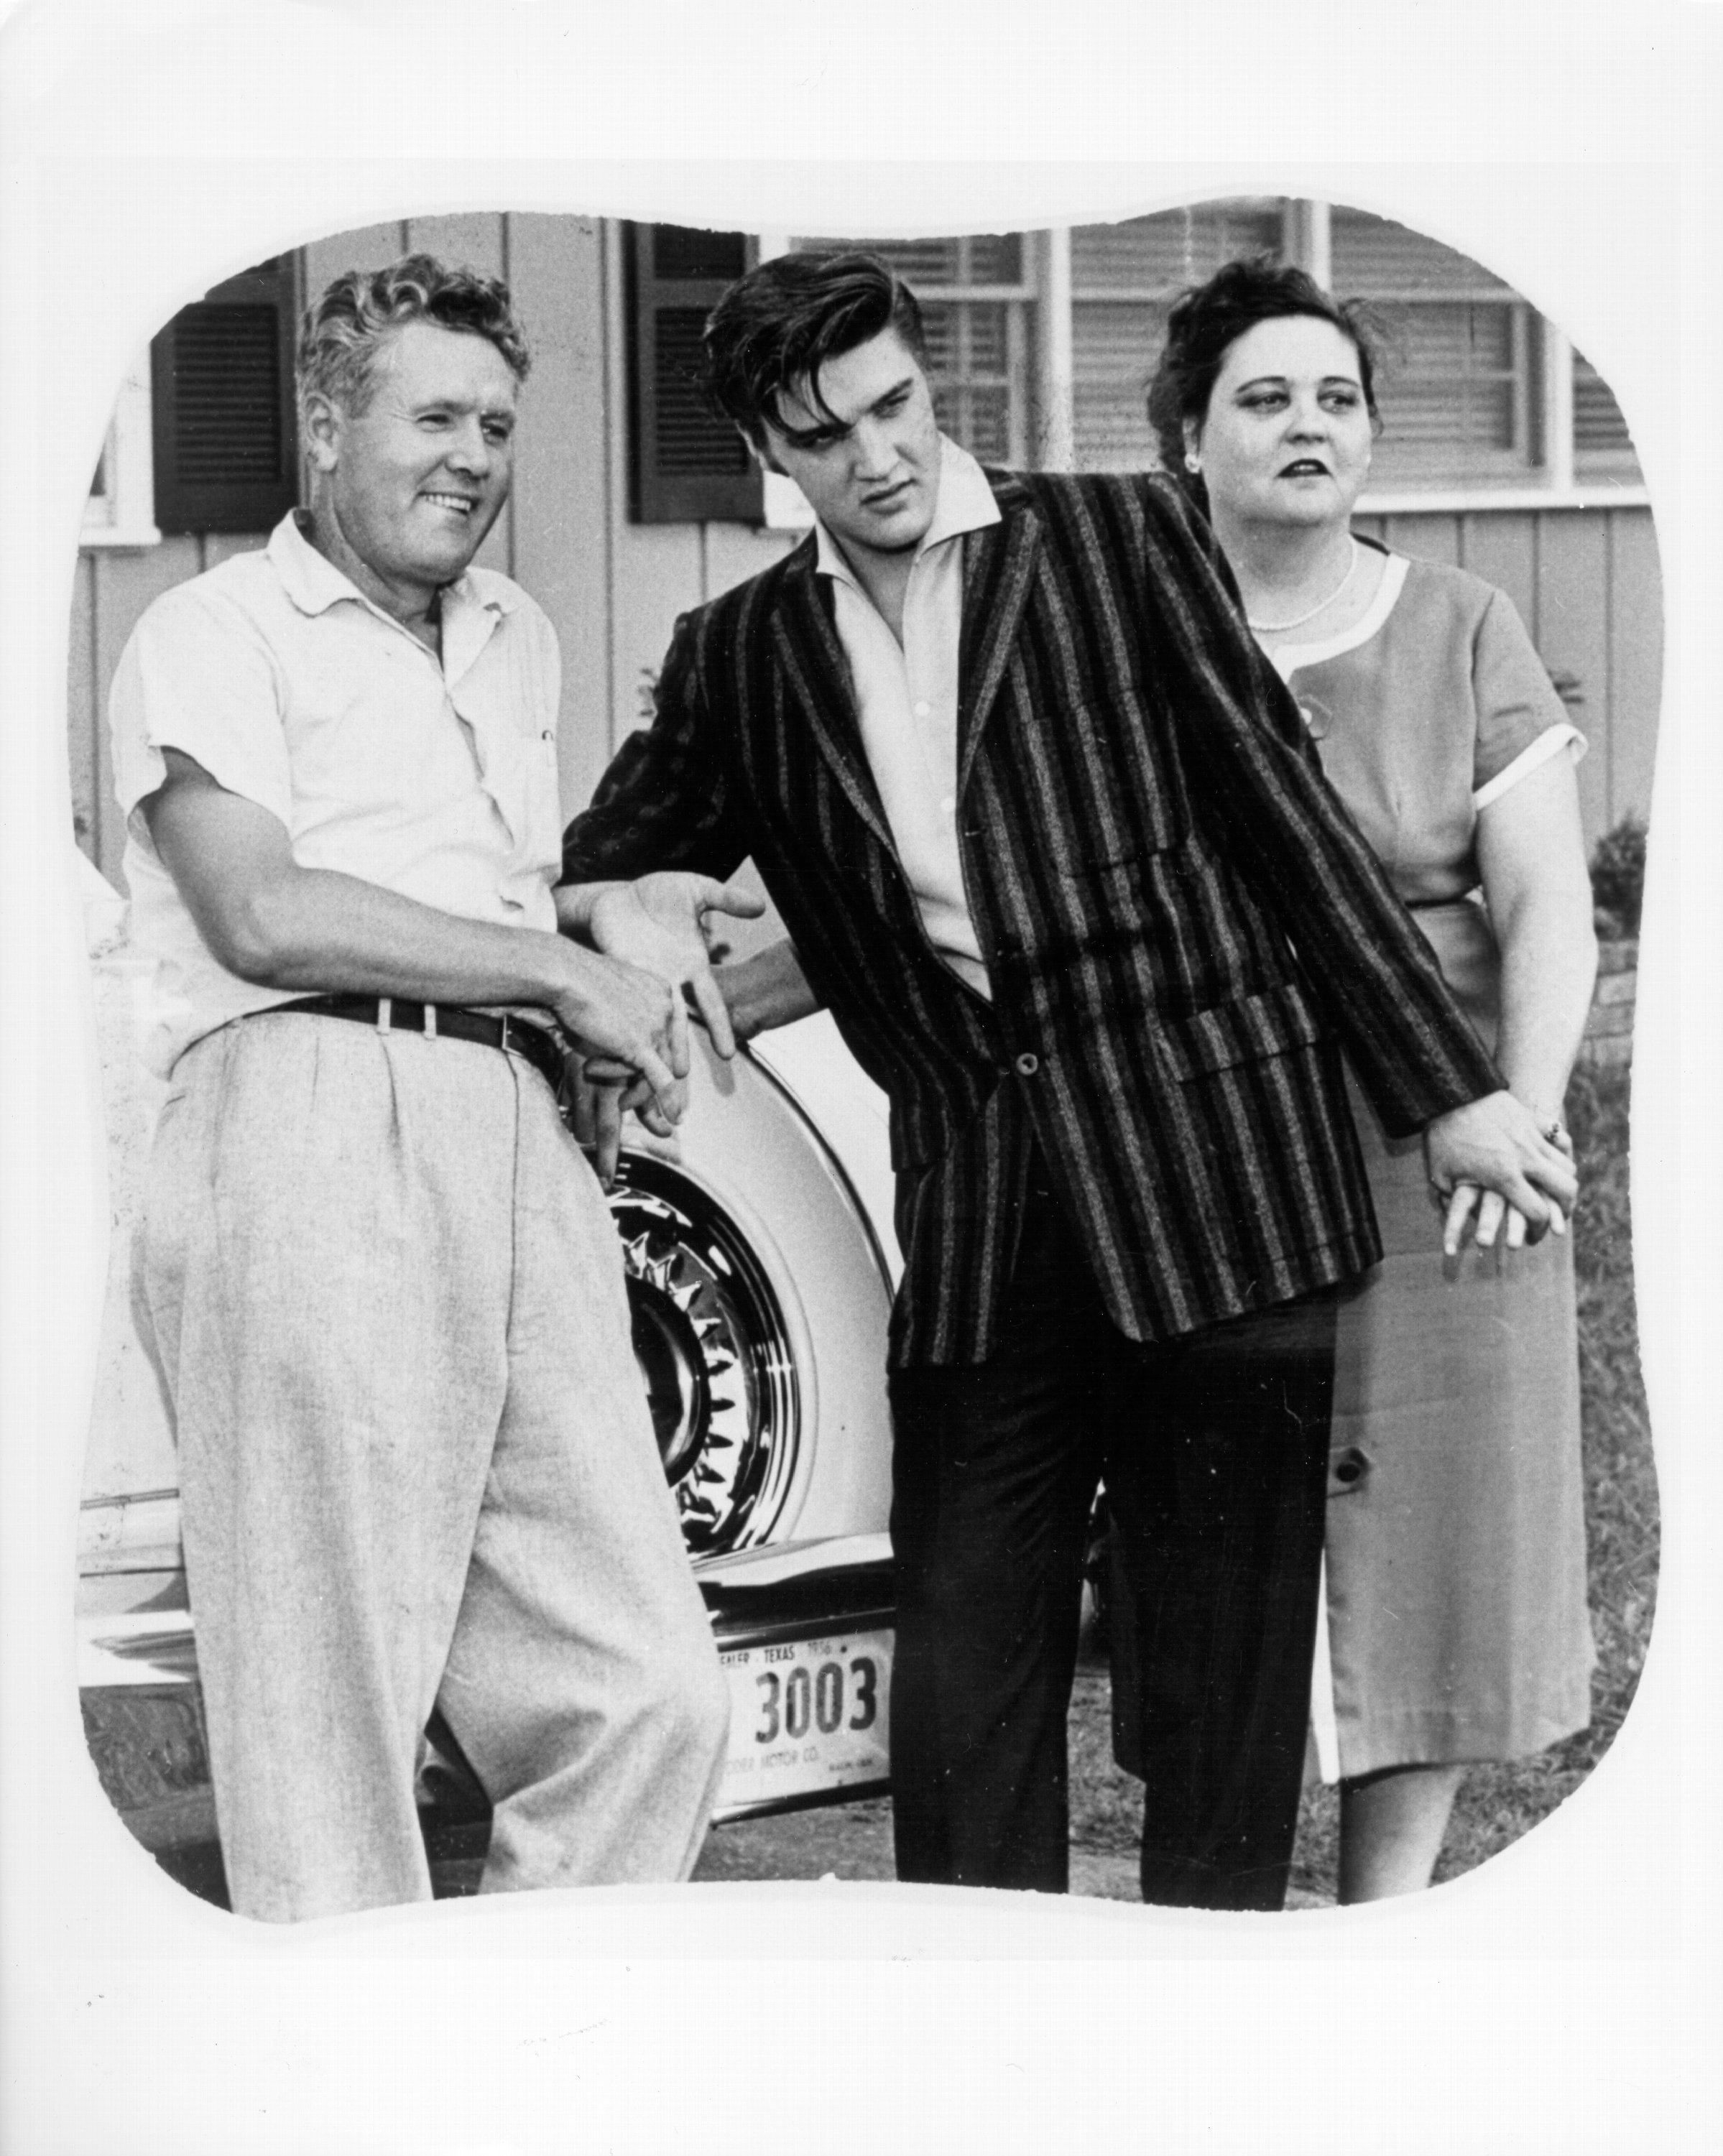 Rock and roll singer Elvis Presley poses for a portrait with his parents Vernon and Gladys Presley in circa 1956. | Source: Getty Images